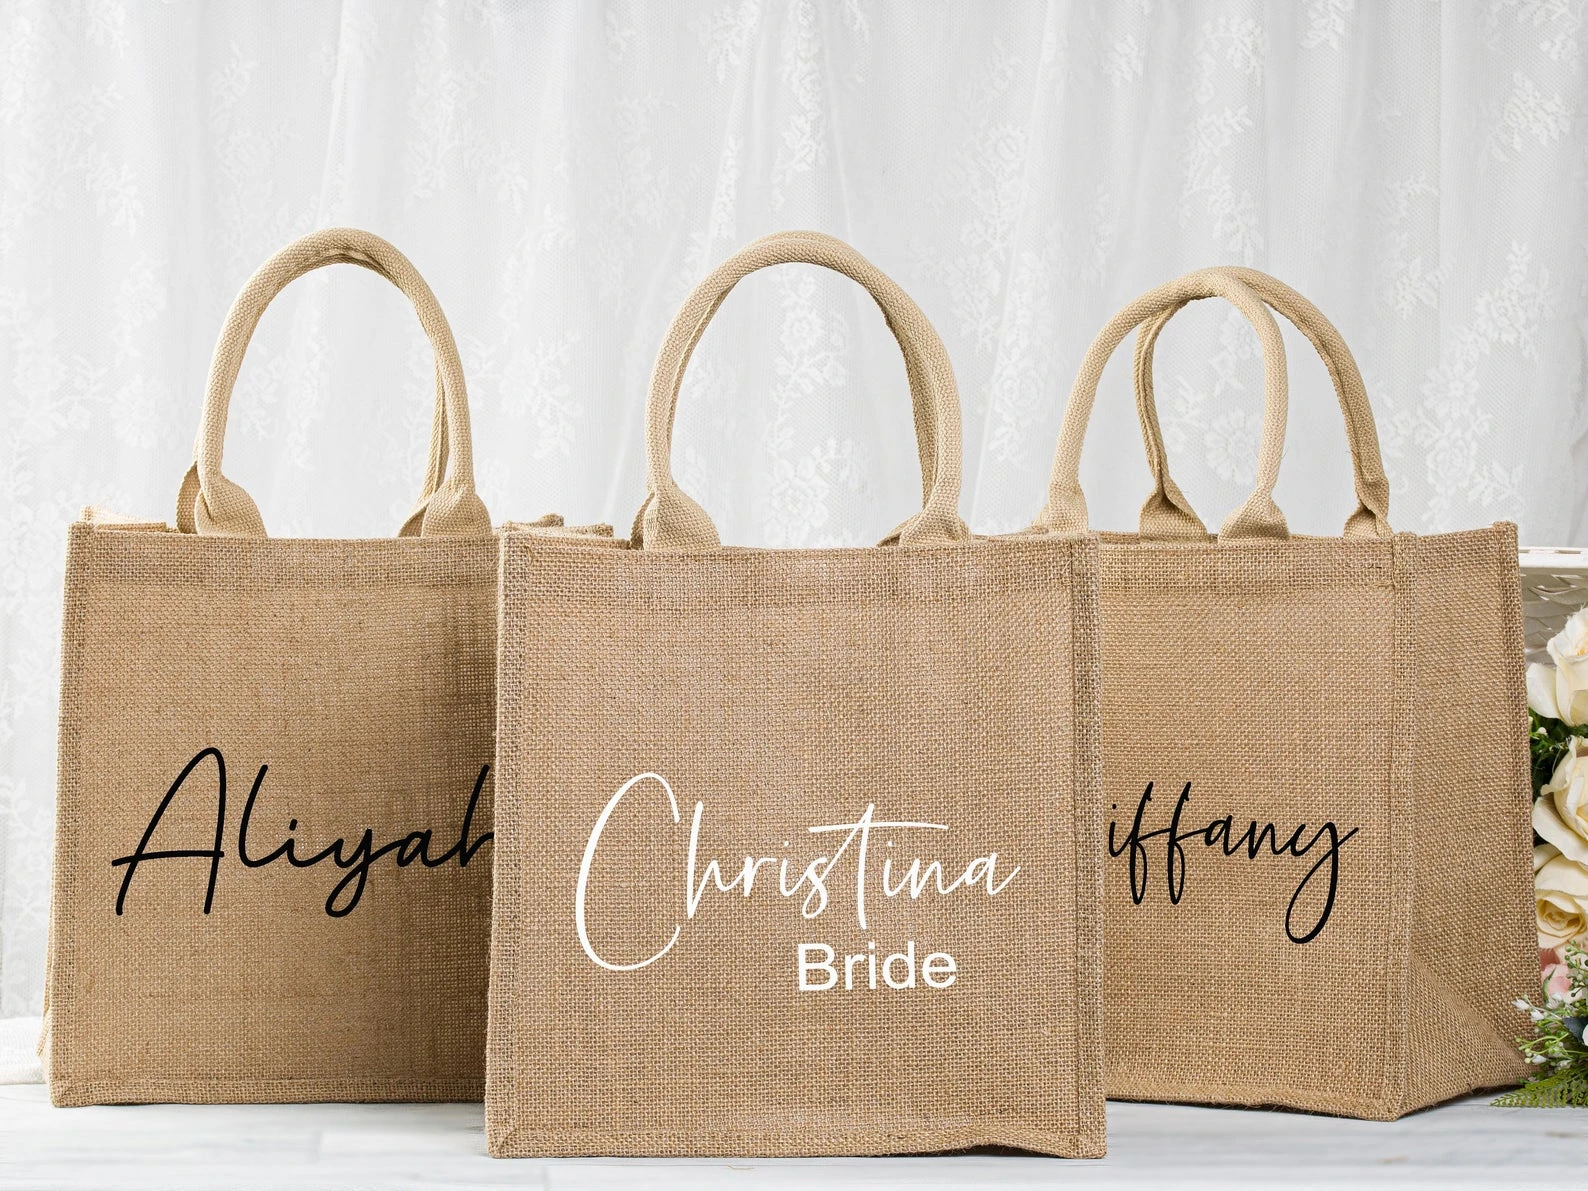 Customizable Juco Bag - Wedding - WBG1012 - WBG1012 at Rs 139.00 | Gifts  for all occasions by Wedtree